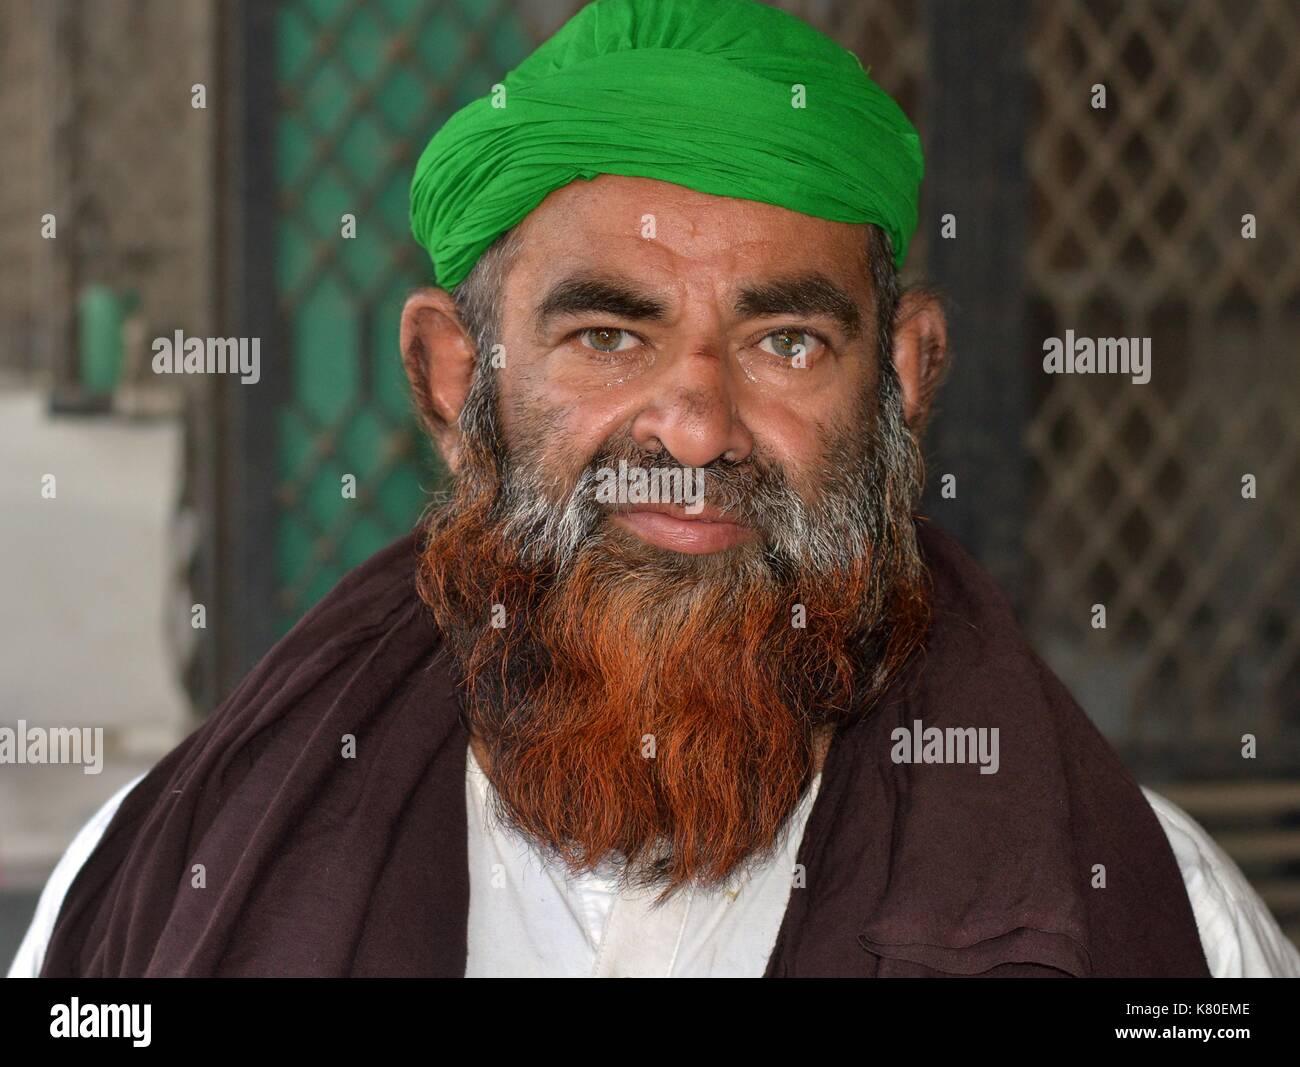 Elderly big Indian Muslim man with henna-dyed Muslim beard wears a green turban and a brown prayer shawl and poses for the camera. Stock Photo